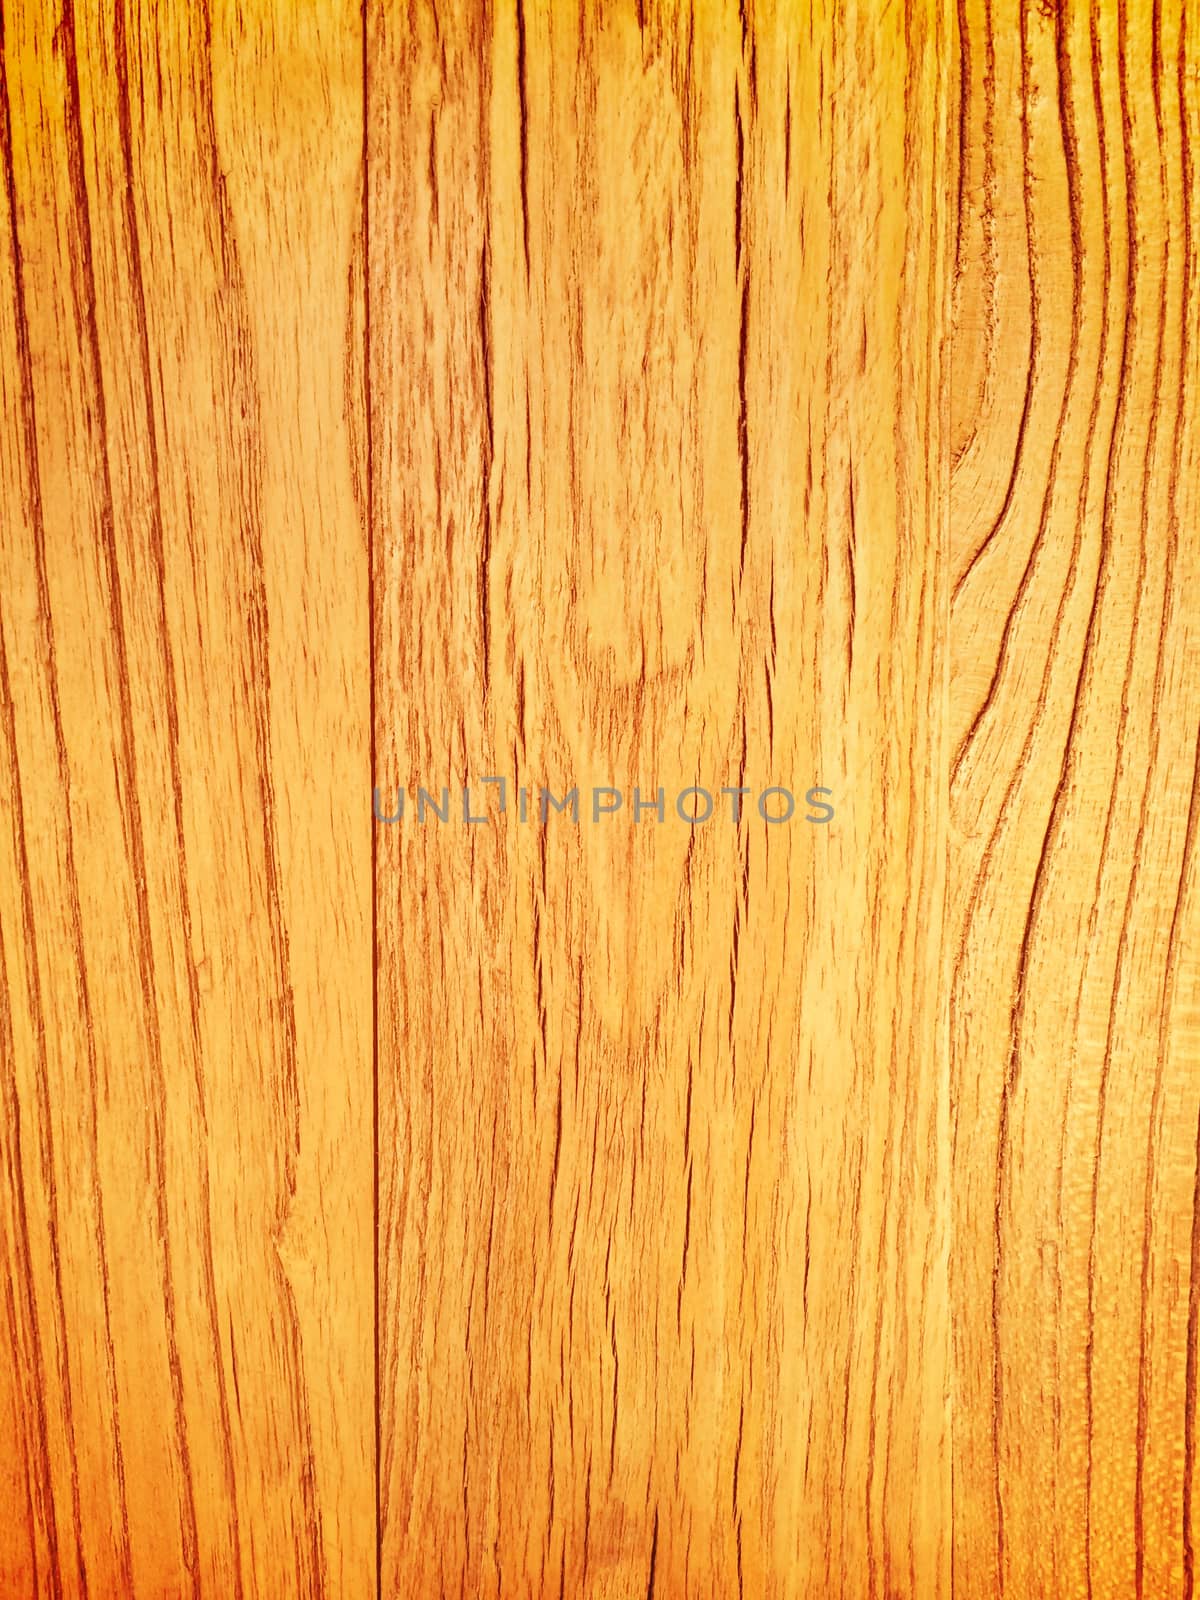 Warm yellow wood background. Abstract wooden texture.